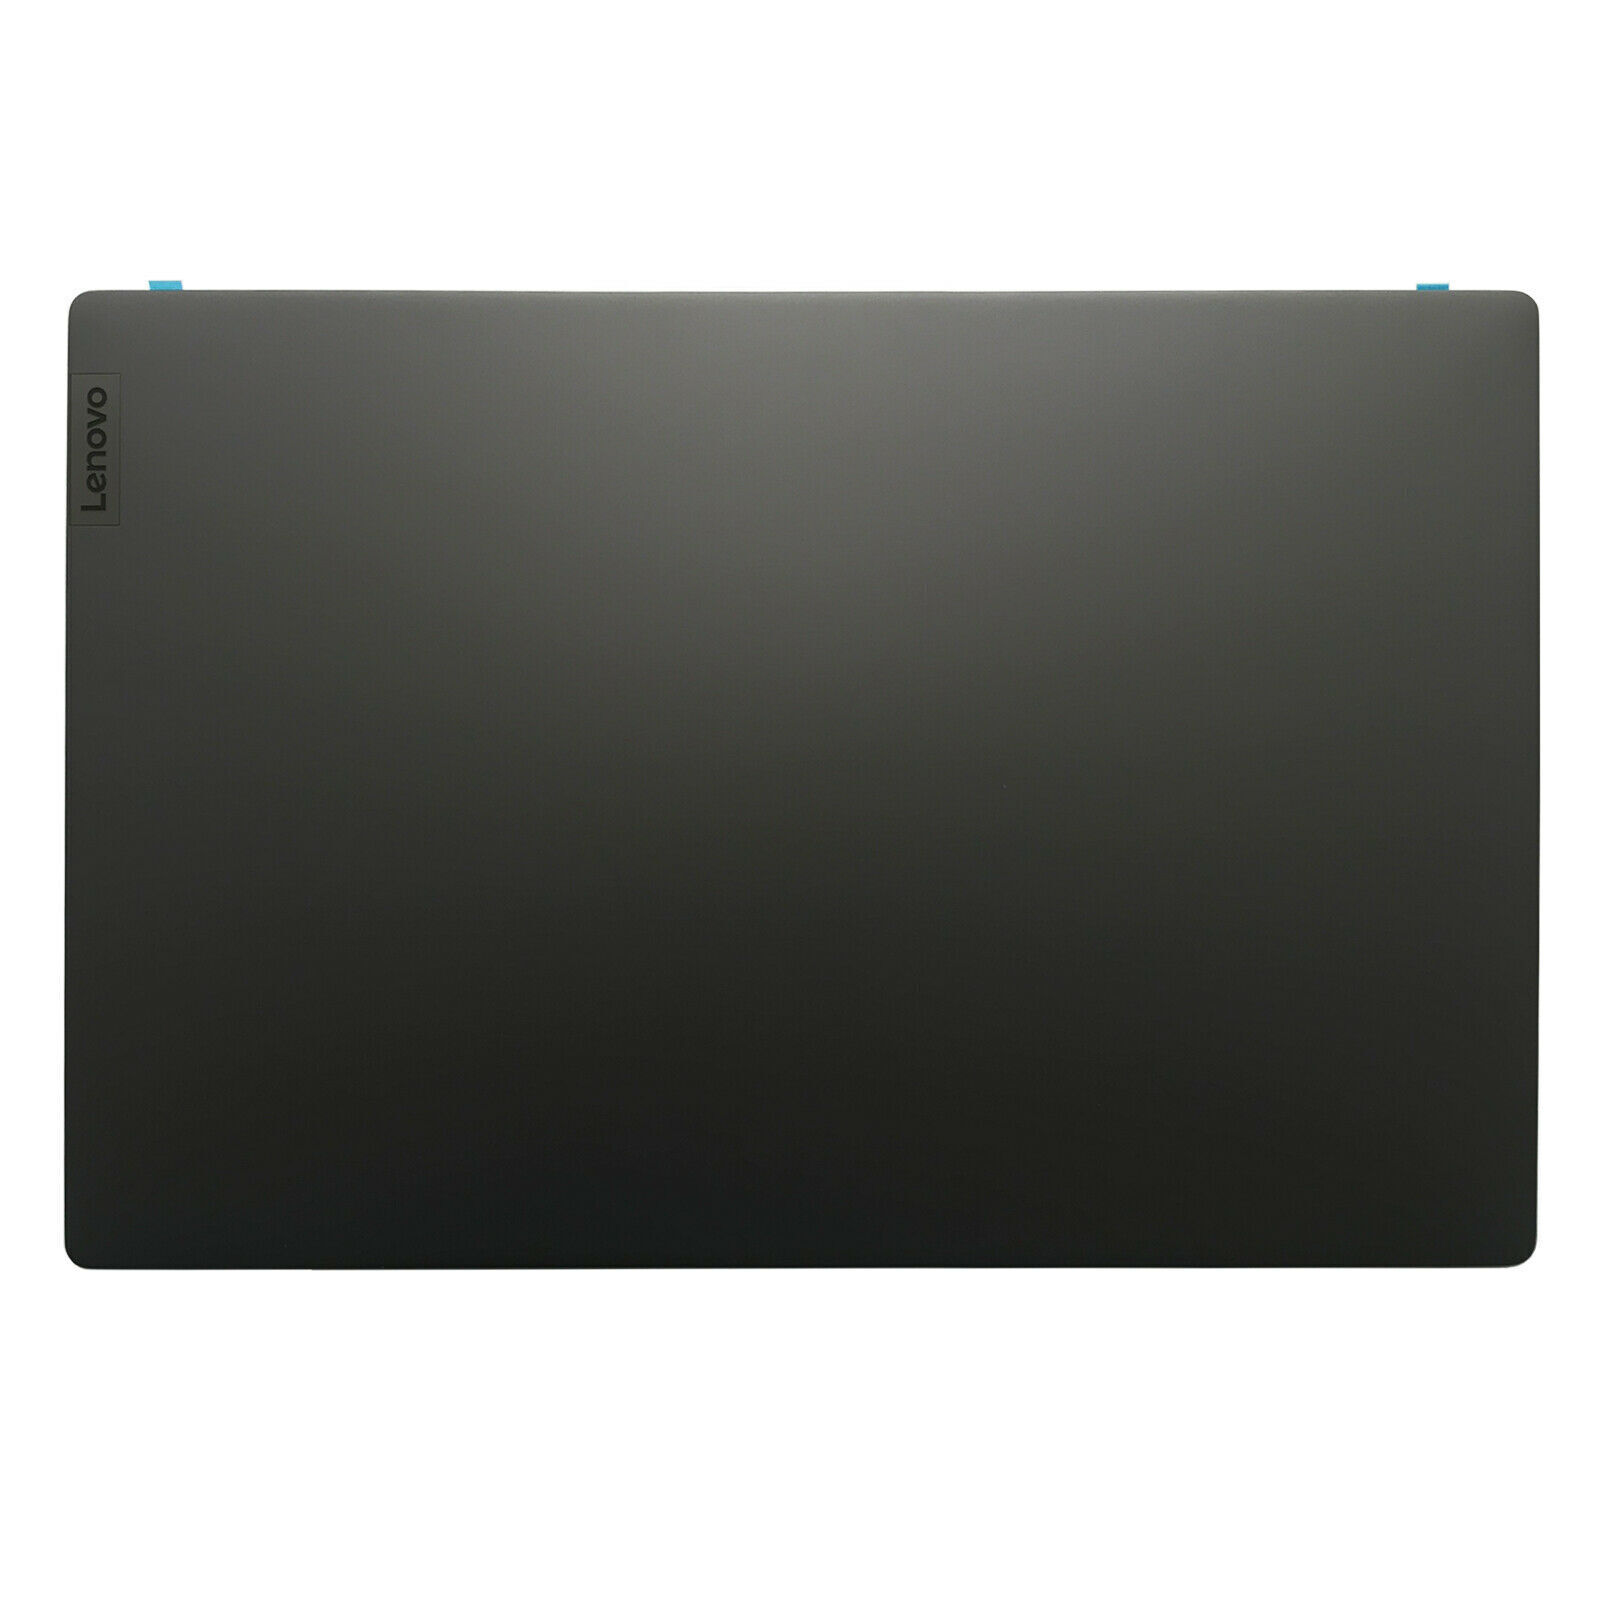 LCD Back Cover/FrontBezel/Hinges For Lenovo ideapad 5 15IIL05 15ARE05 15ITL05